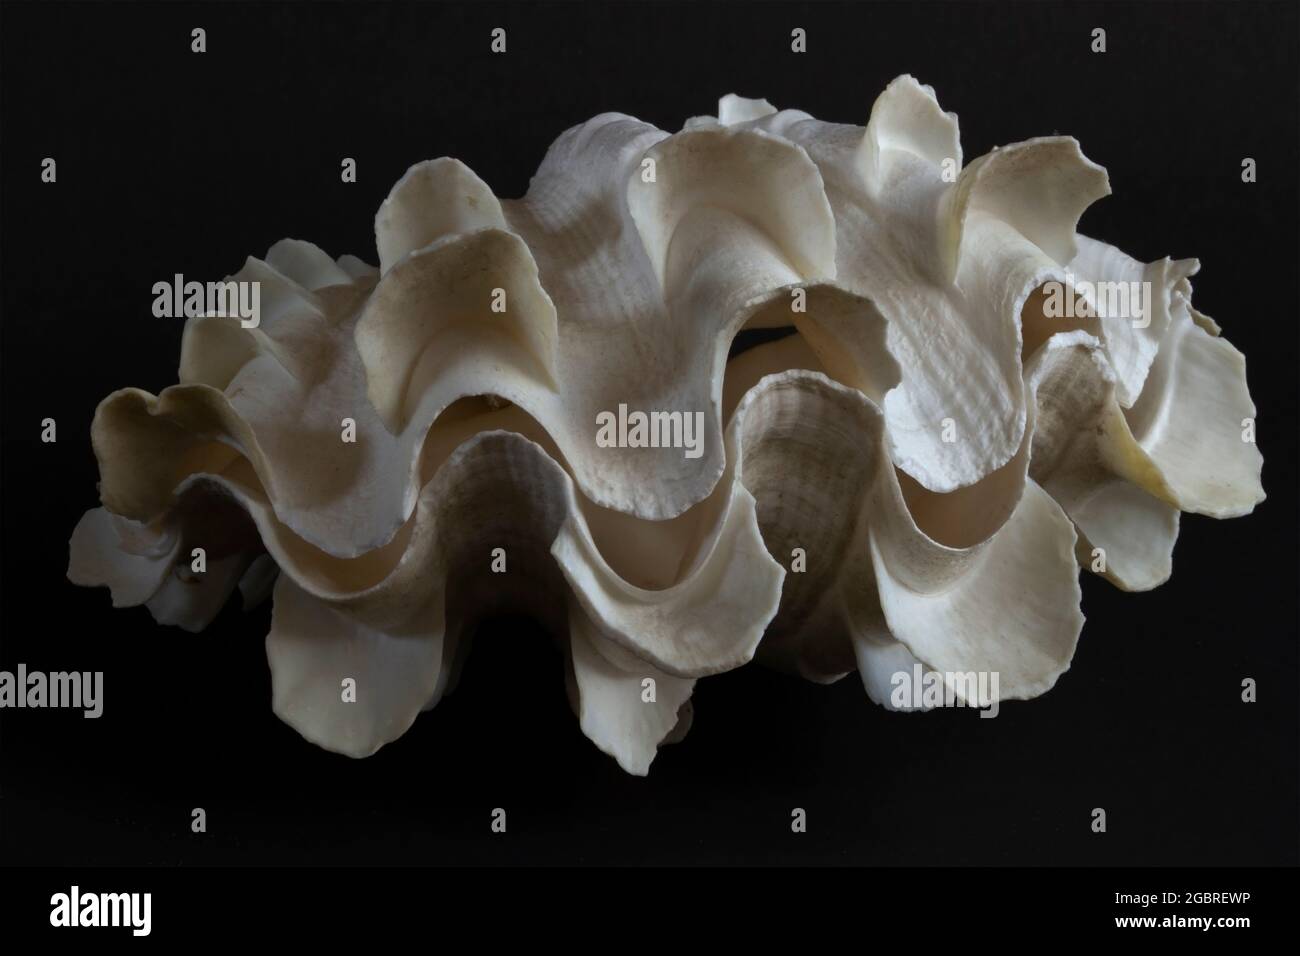 One of only two species of Giant clams found in the Western Indian Ocean, the Fluted Giant Clam has distinctive  scutes between large ribs. Stock Photo